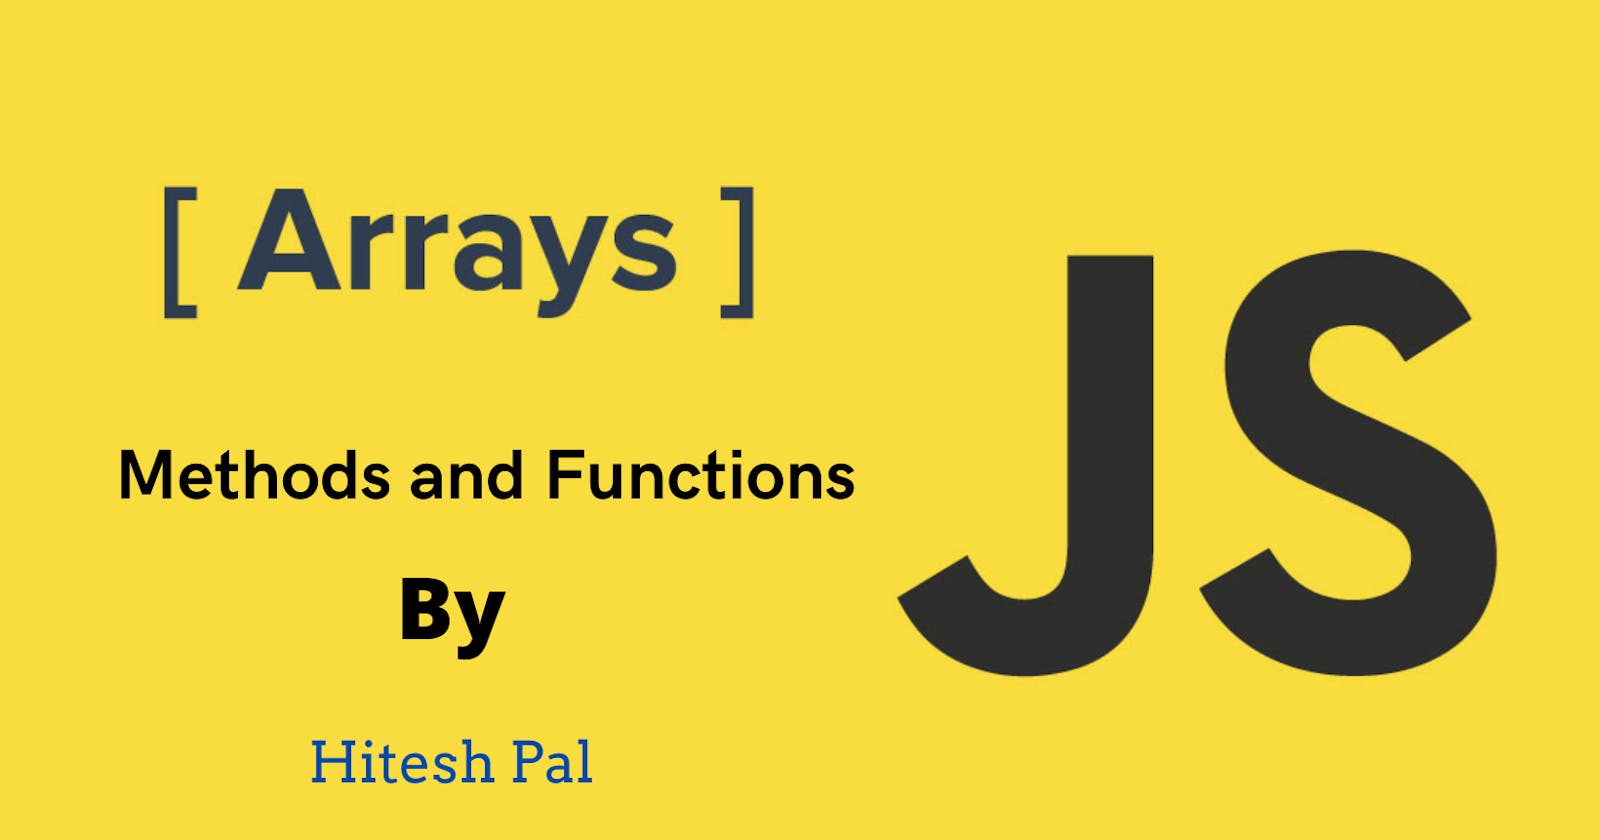 Javascript Arrays and their Methods and Properties